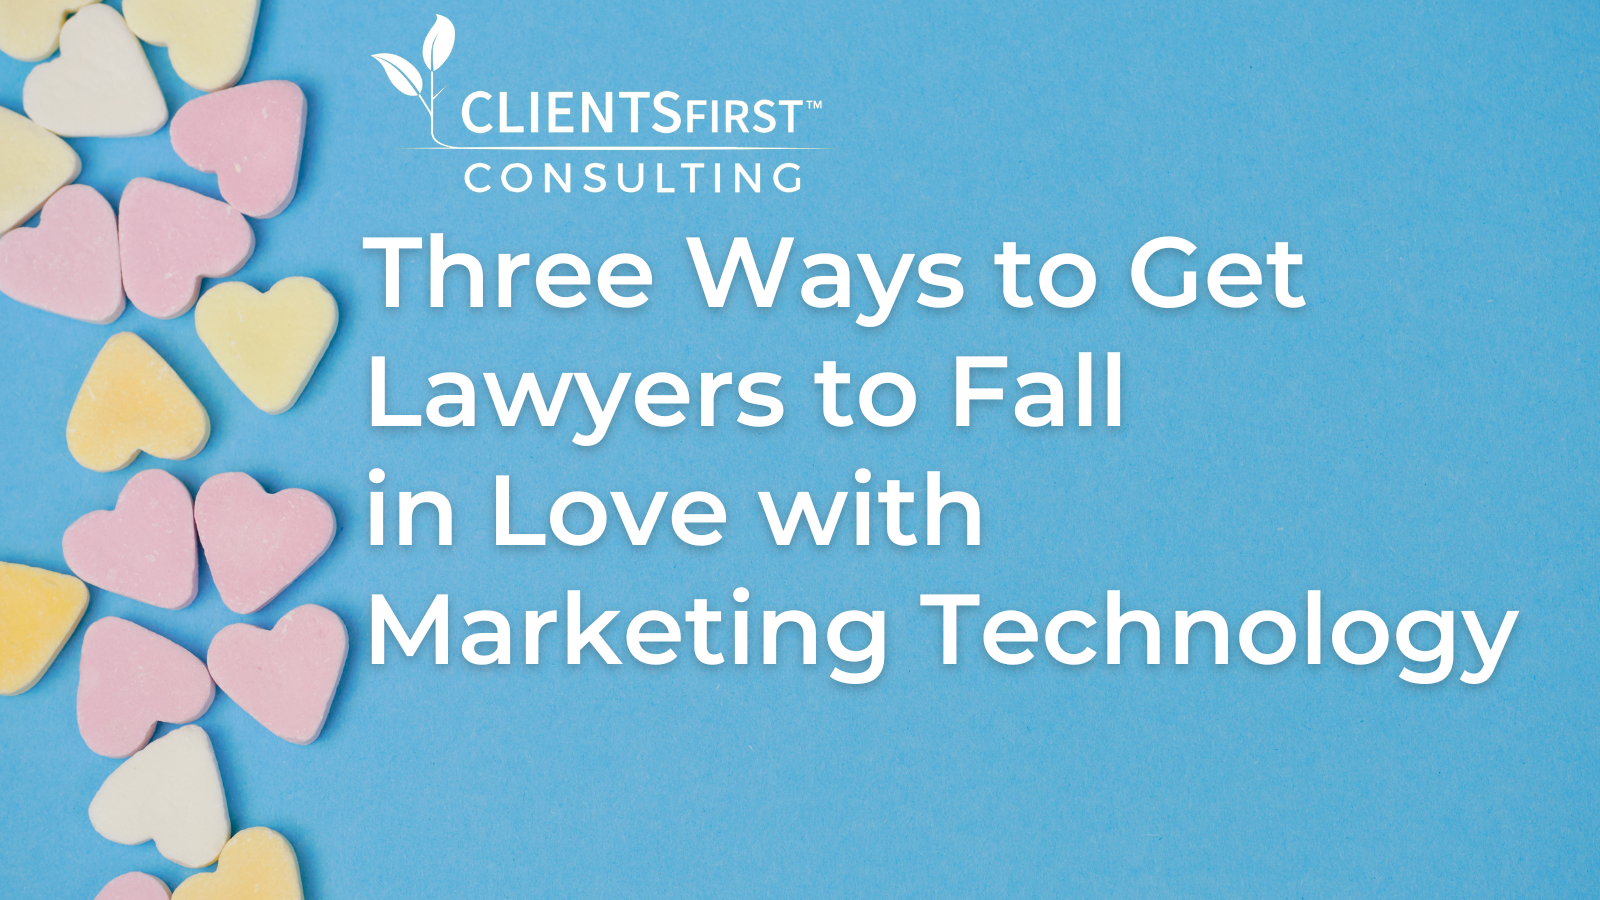 Candy hearts with a blue background and the words spelling out "Three Ways to Get Lawyers to Fall in Love with Marketing Technology"